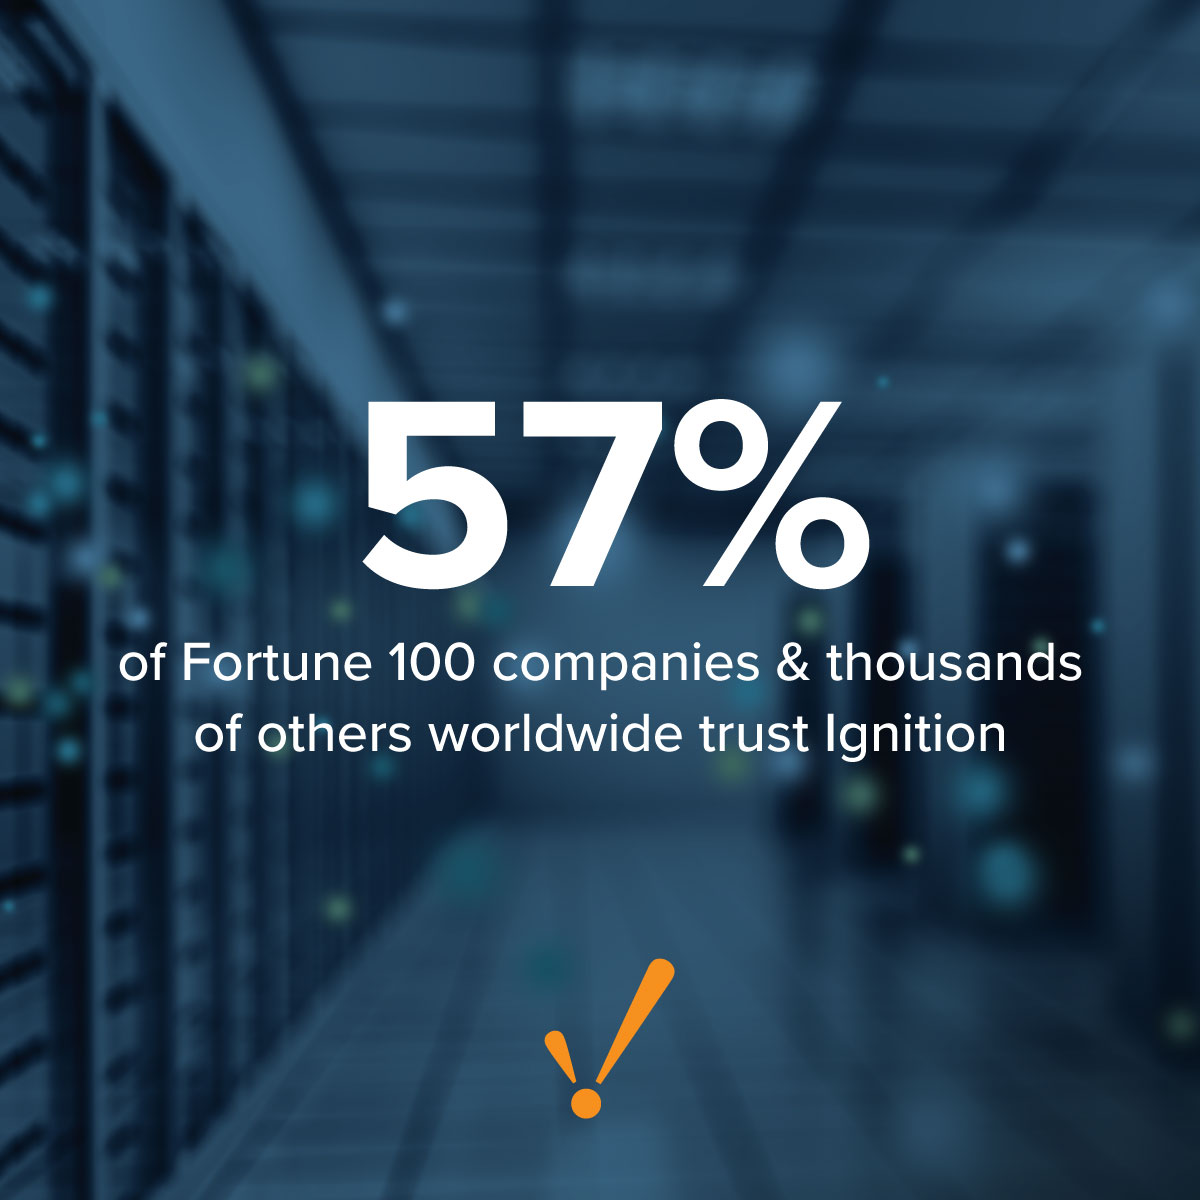 57% of Fortune 100 companies and thousands of others worldwide trust #Ignition to improve their #efficiency and expand their capabilities. What can Ignition do for you? inductiveautomation.com/about/customers #productivitysoftware #data #fortune100 #fortune500